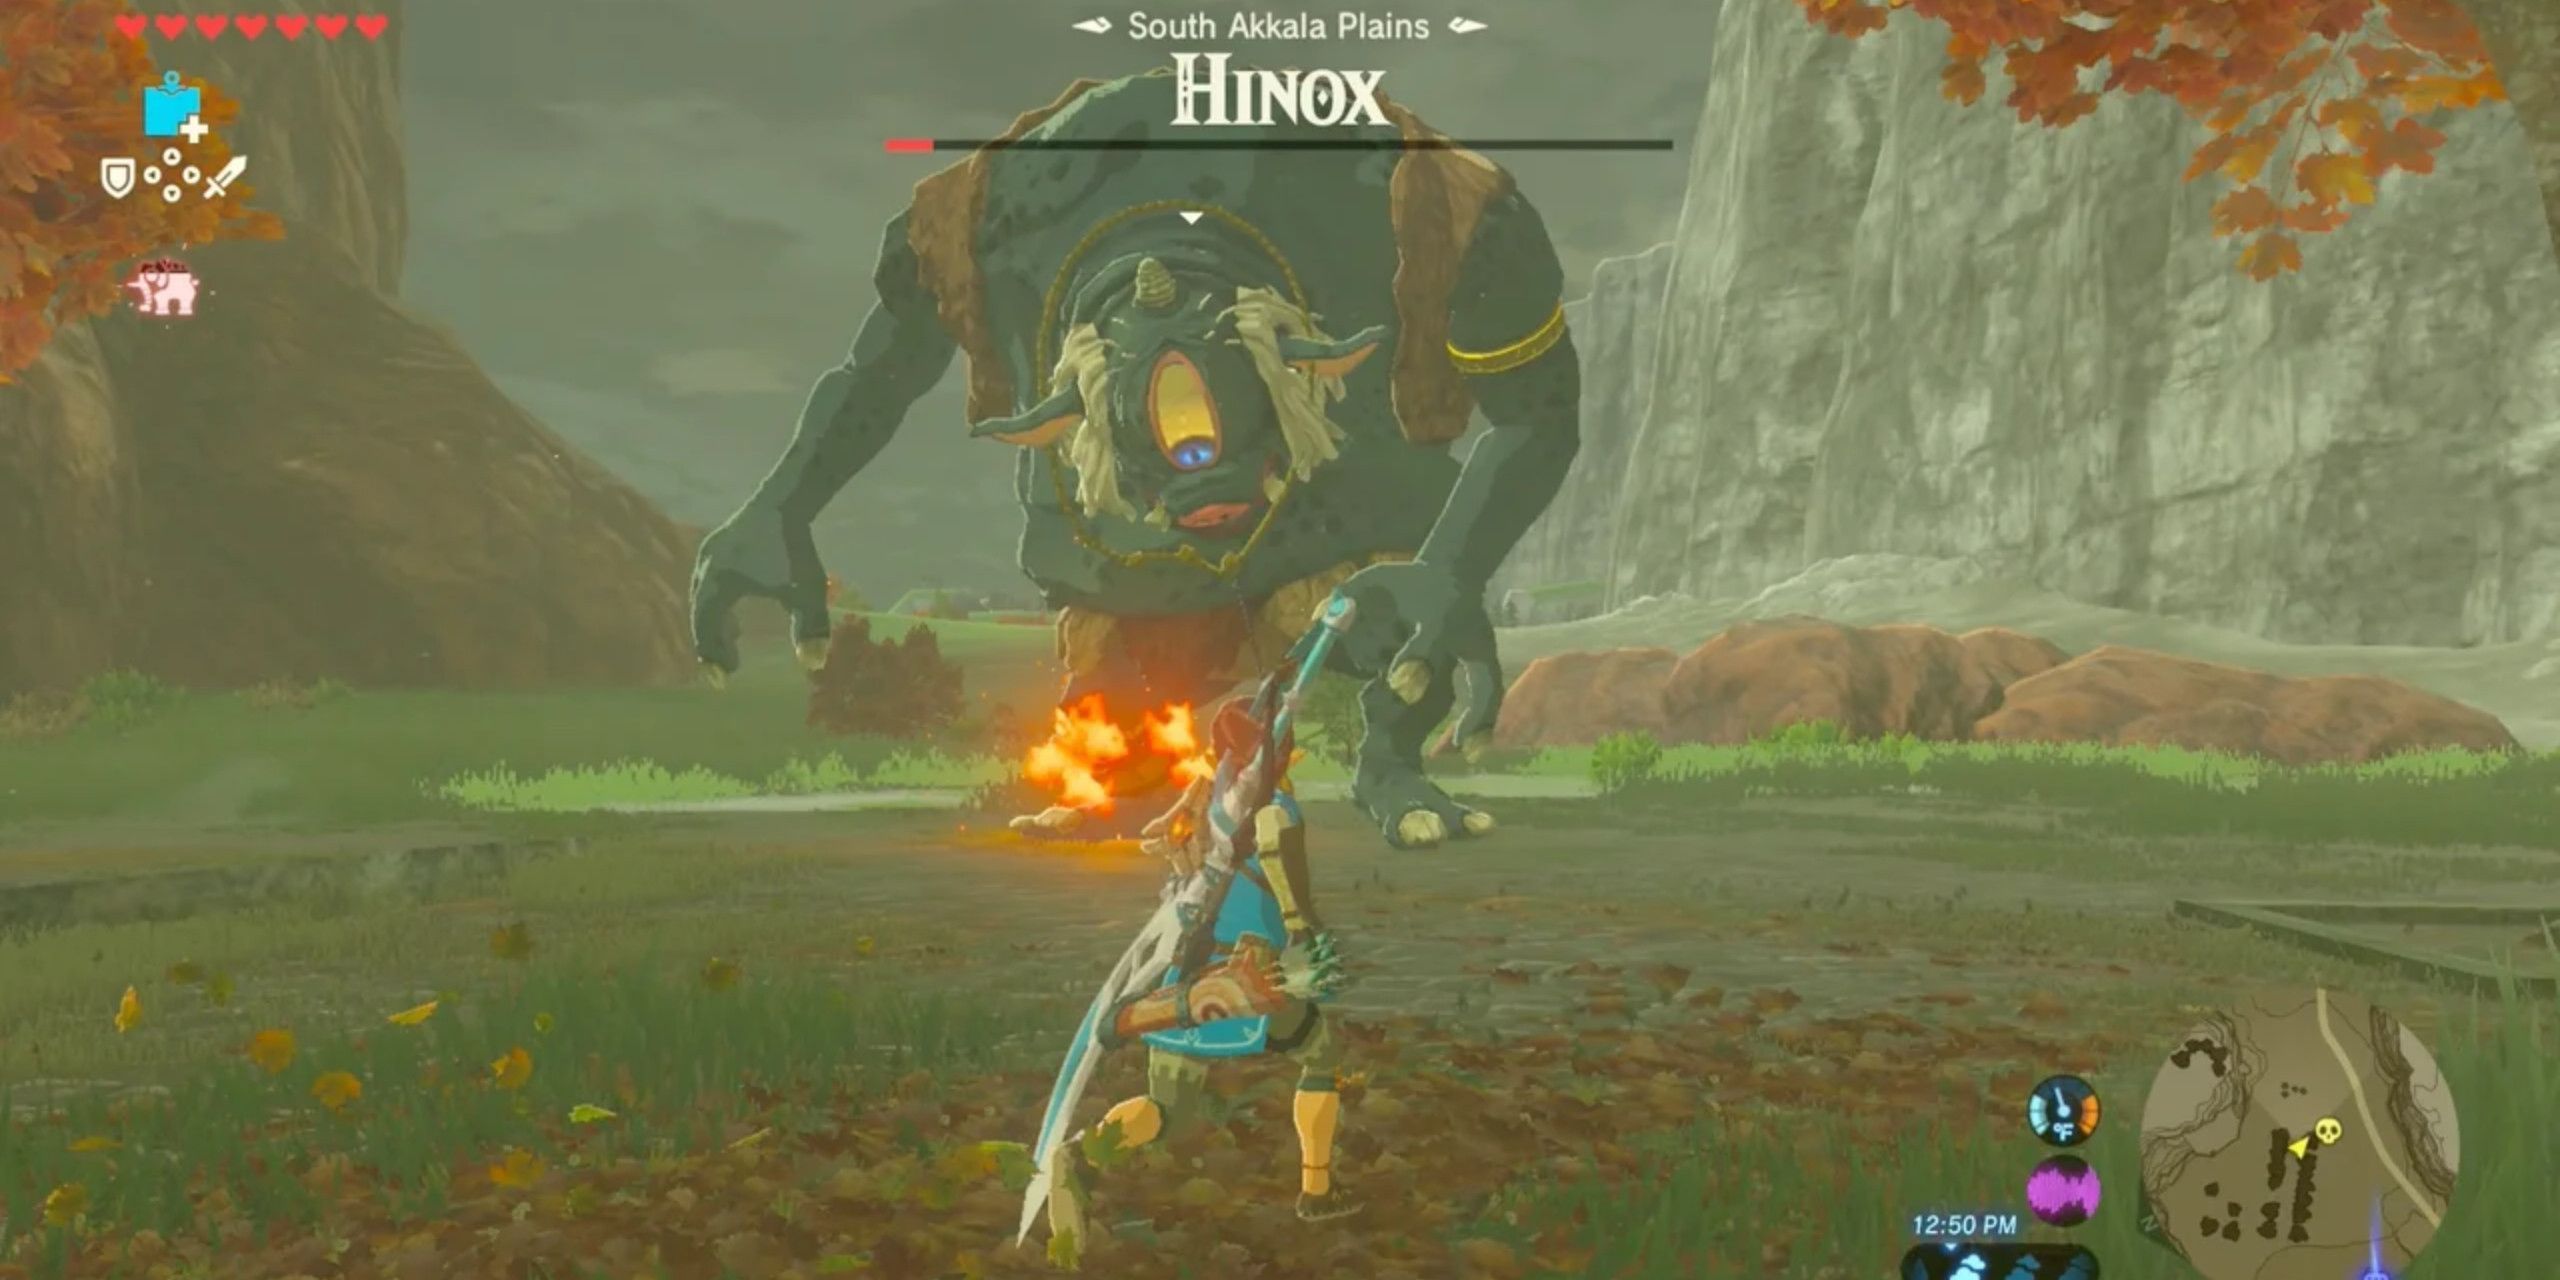 Link facing Hinox located in the South Akkala plains